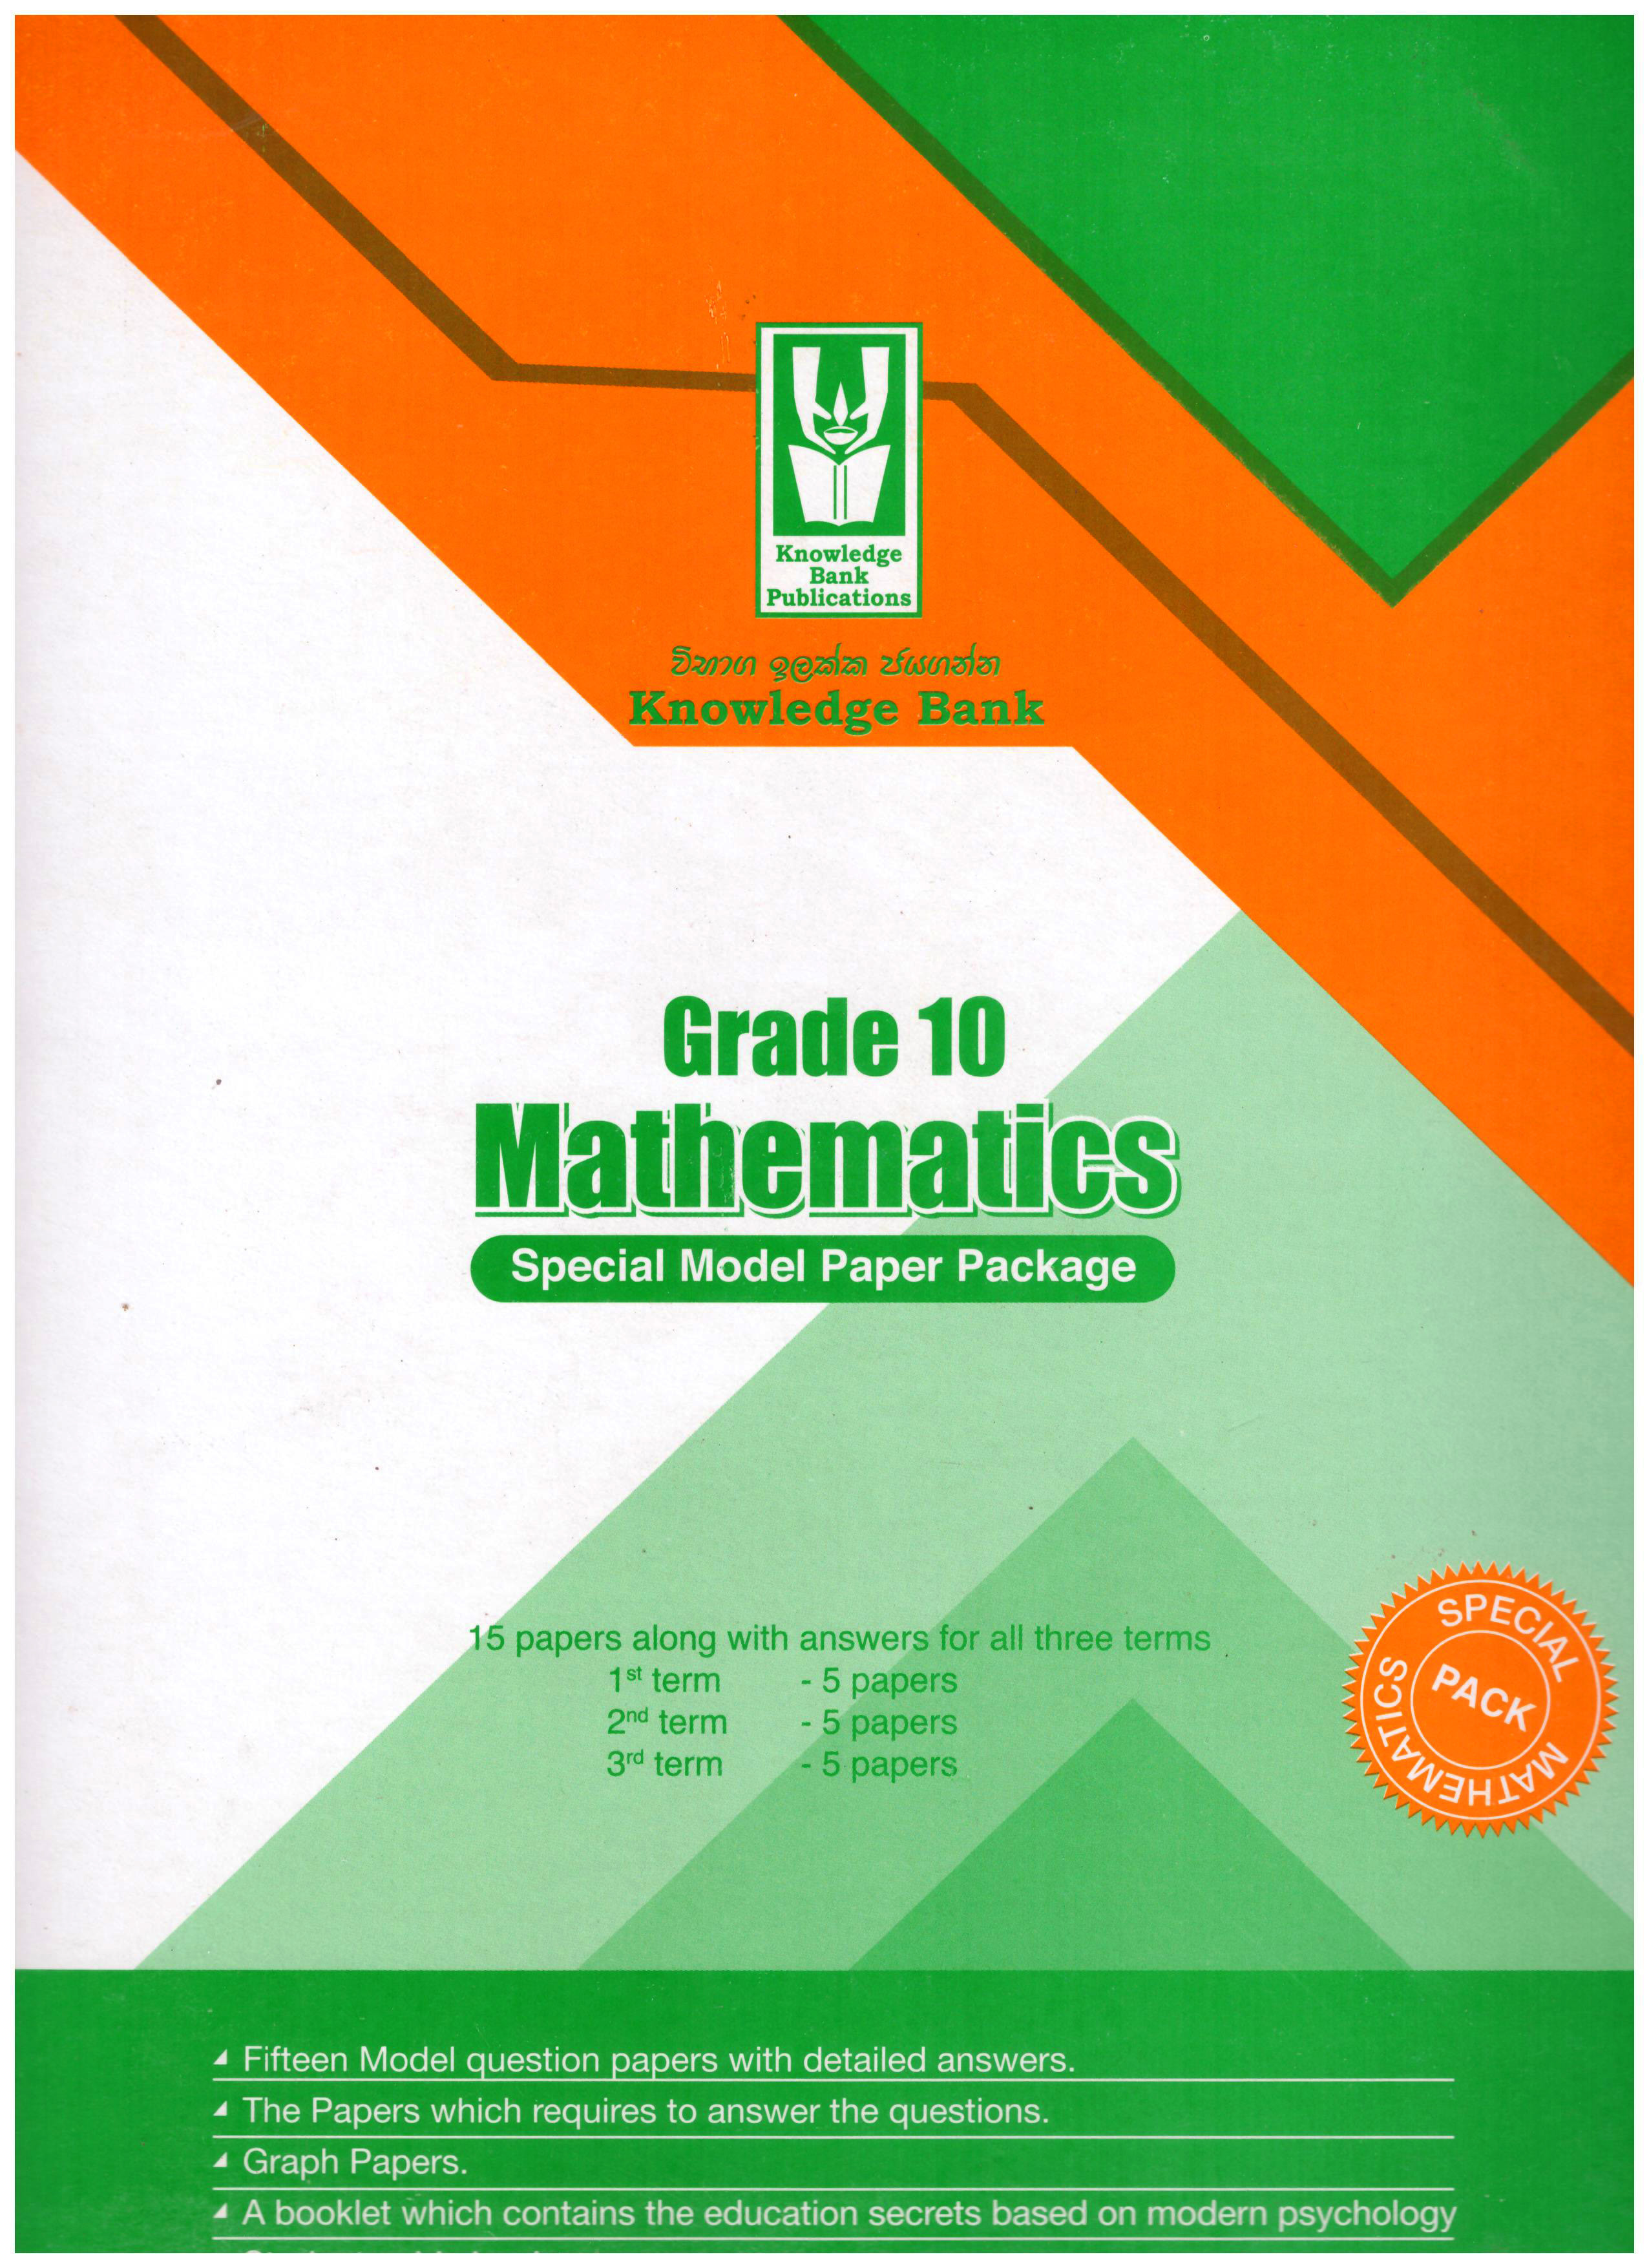 Knowledge Bank Grade 10 Mathematics Special Model Paper Package (English Medium)